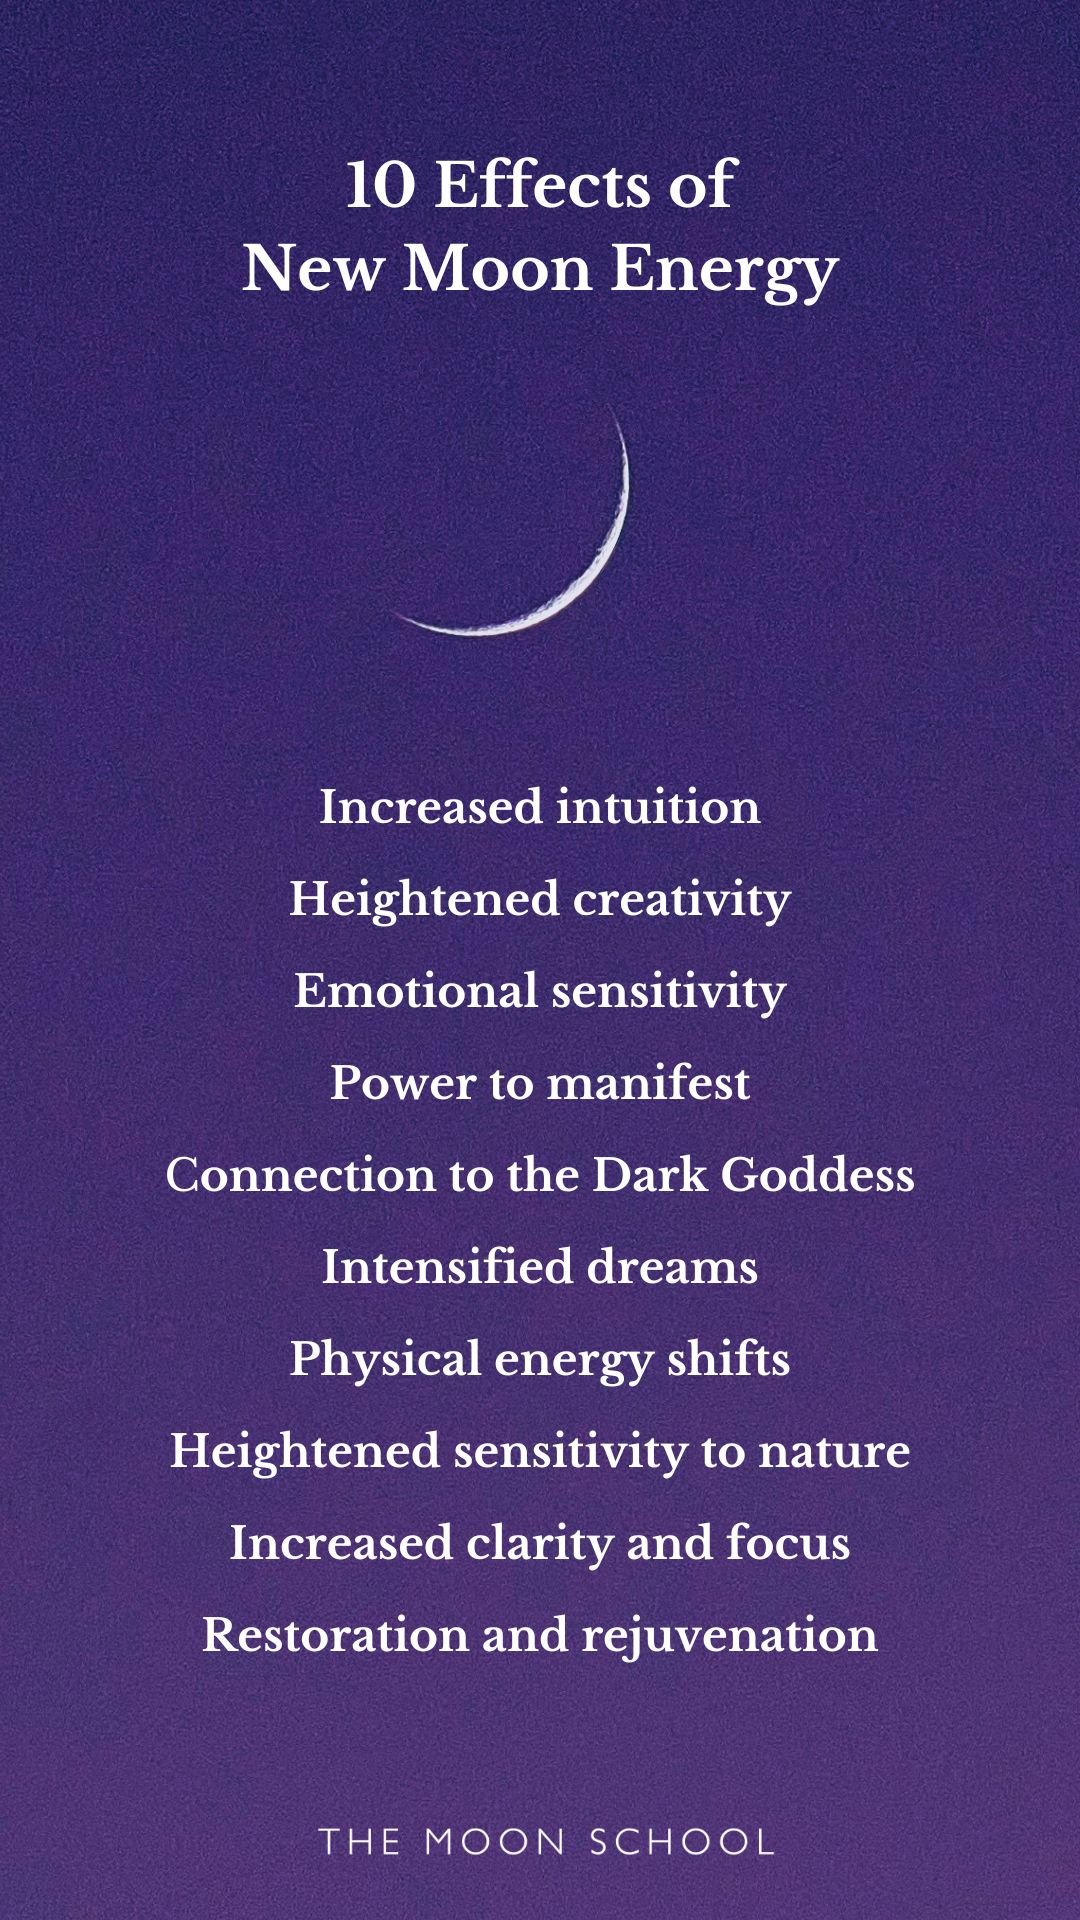 New Moon energy affects